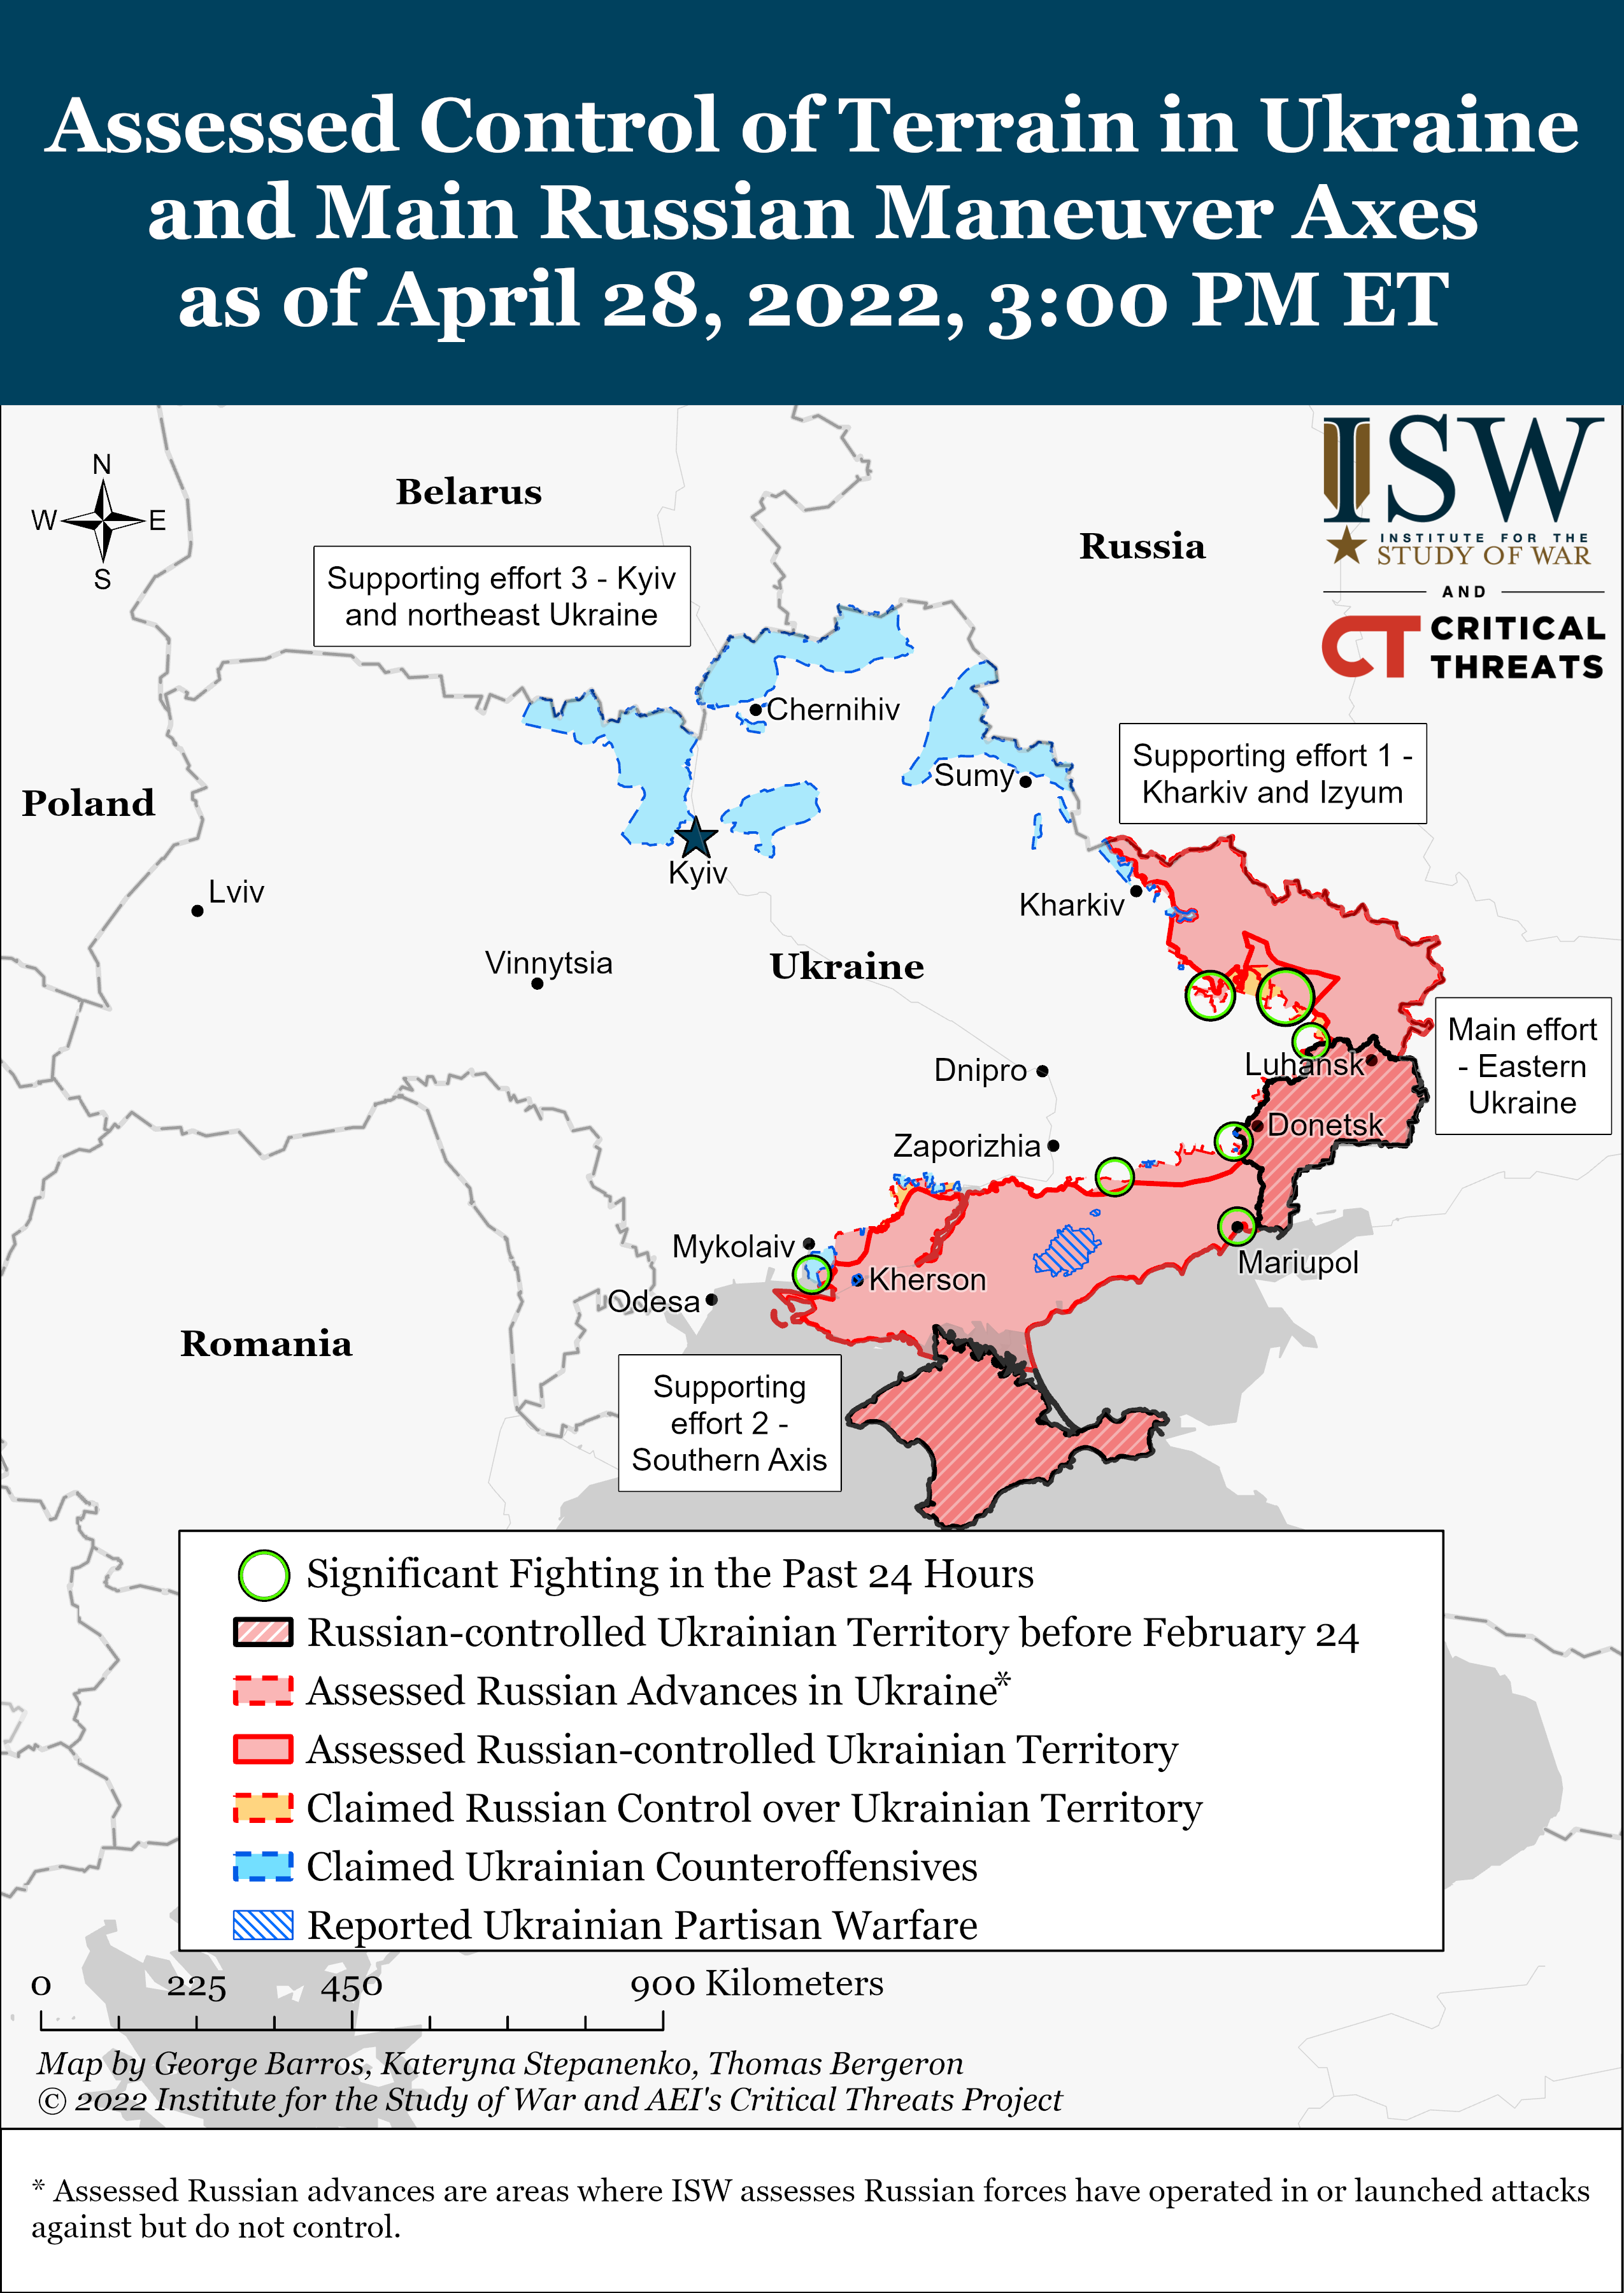 map of Ukraine showing Russian control along eastern border and Ukrainian counteroffensive along northern border